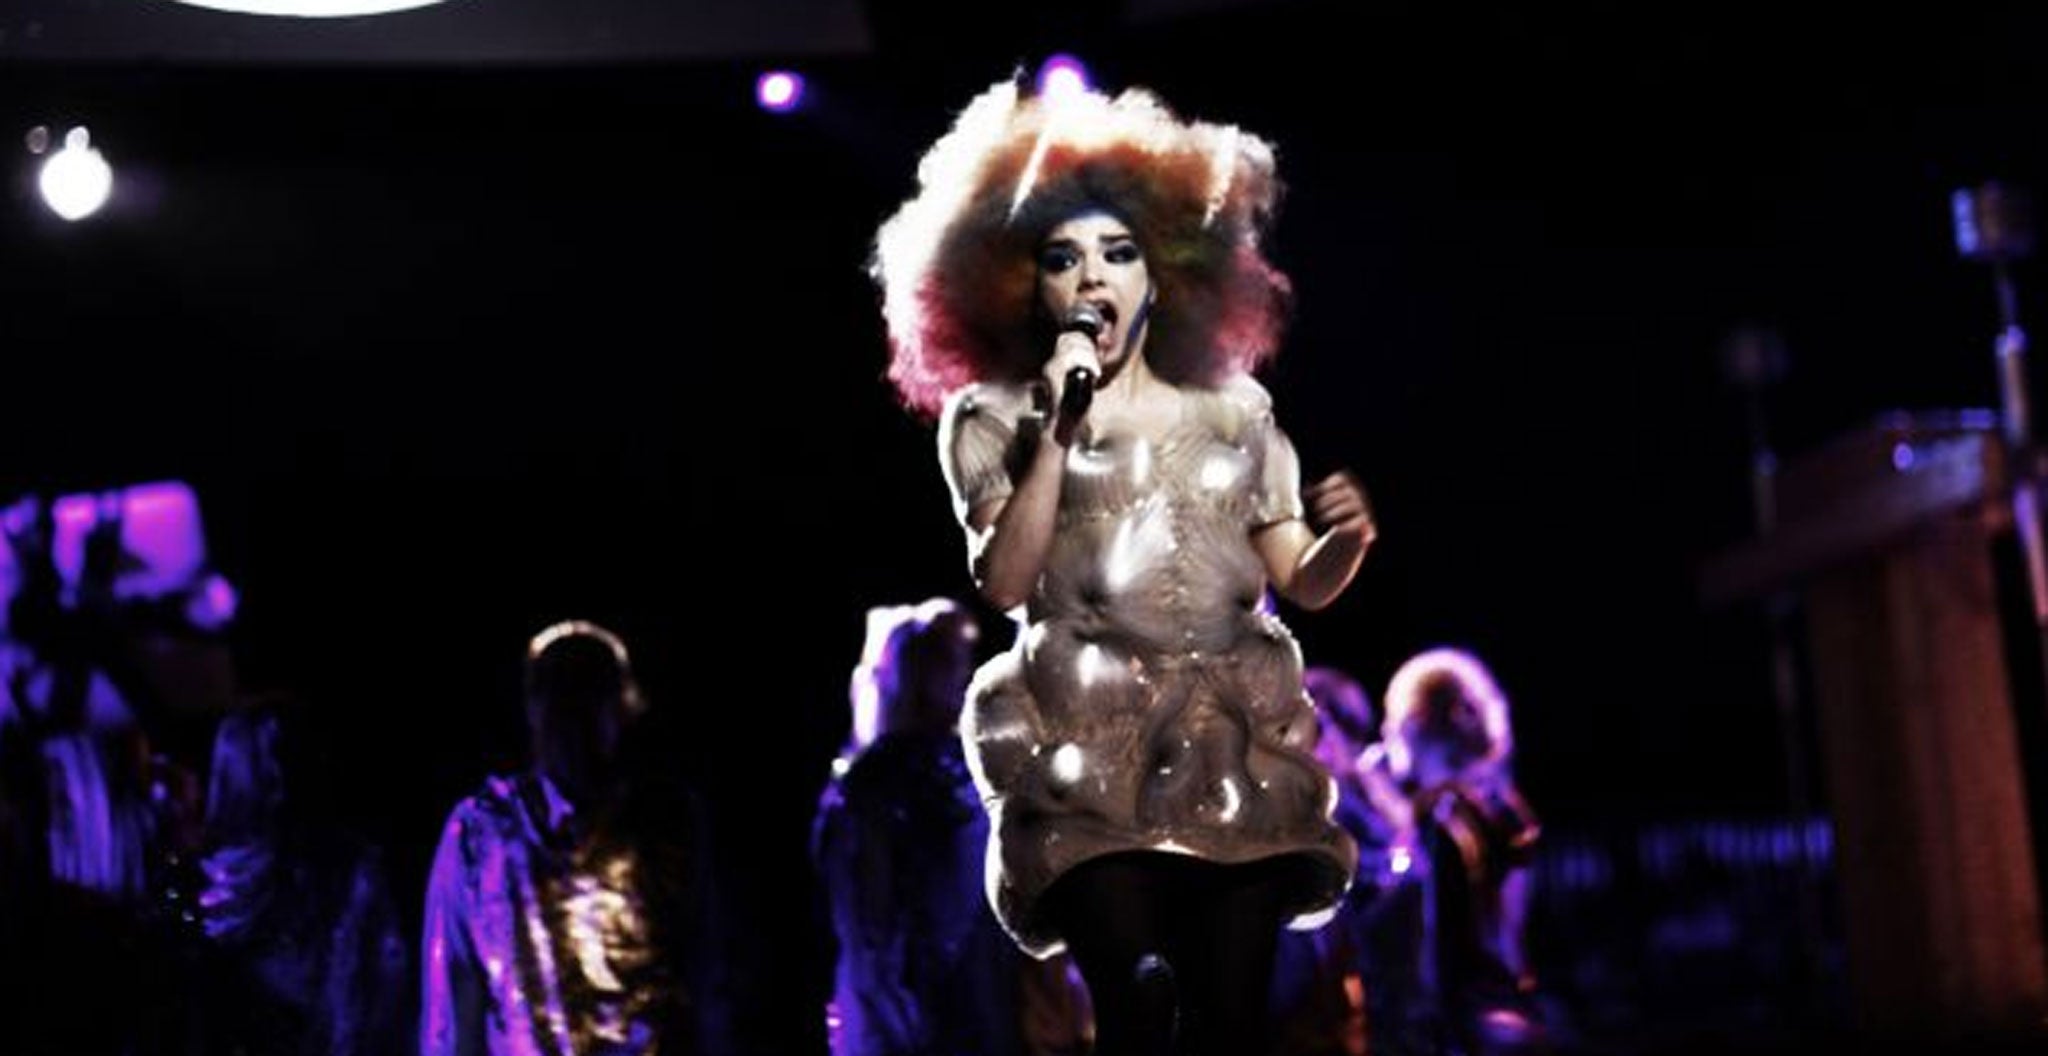 Björk brings her Biophilia tour to an end in a flurry of bubbles and hair